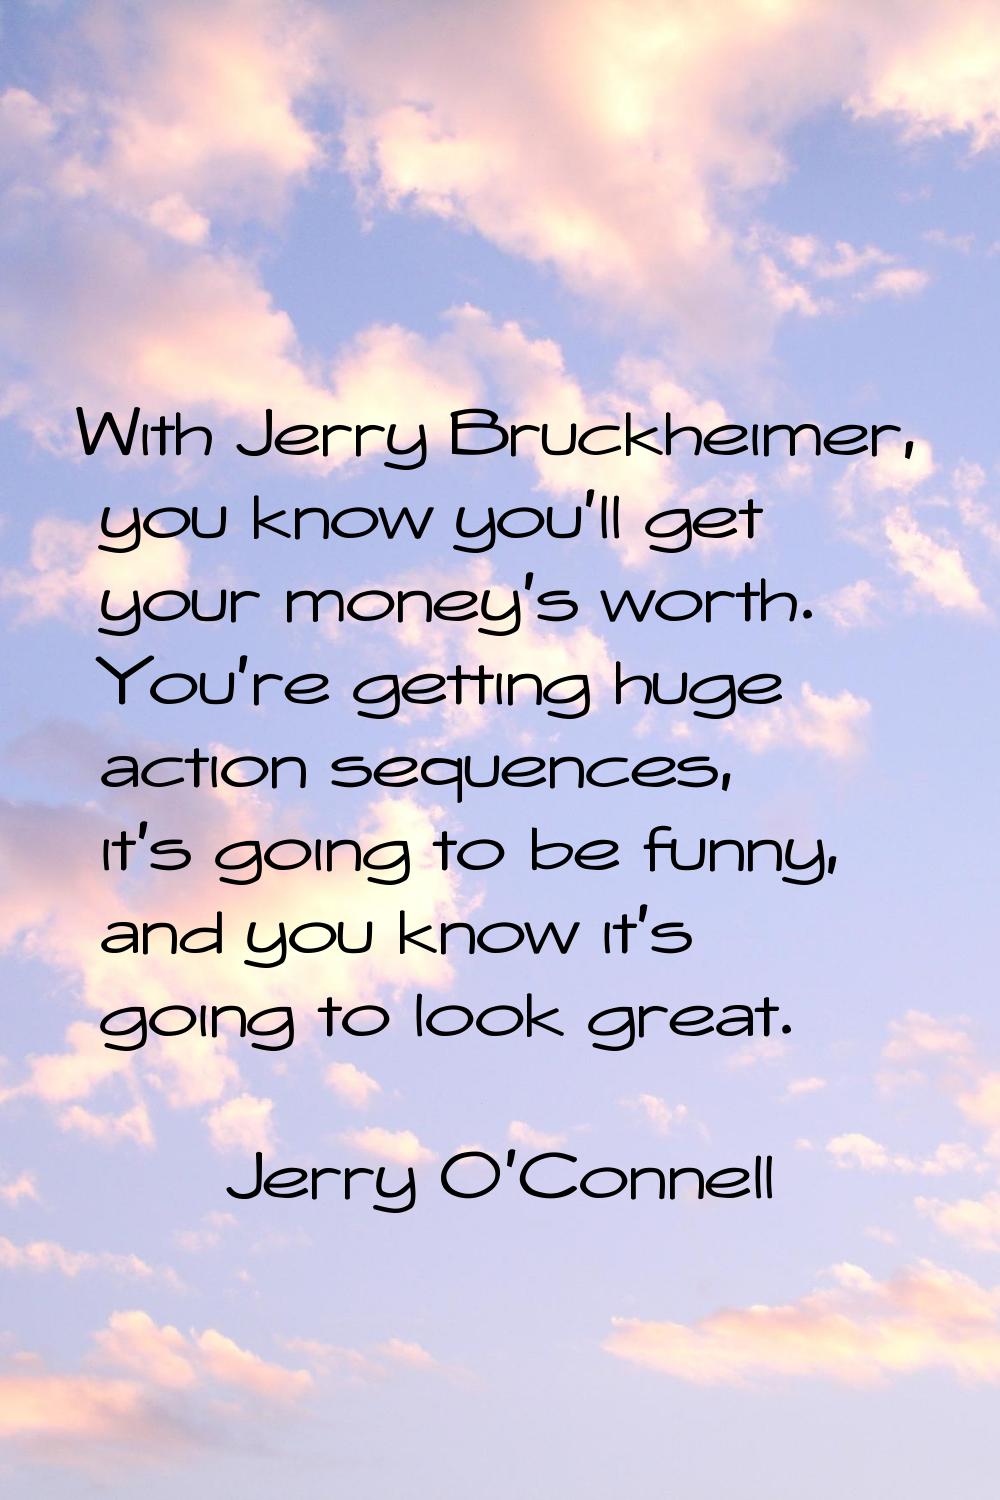 With Jerry Bruckheimer, you know you'll get your money's worth. You're getting huge action sequence